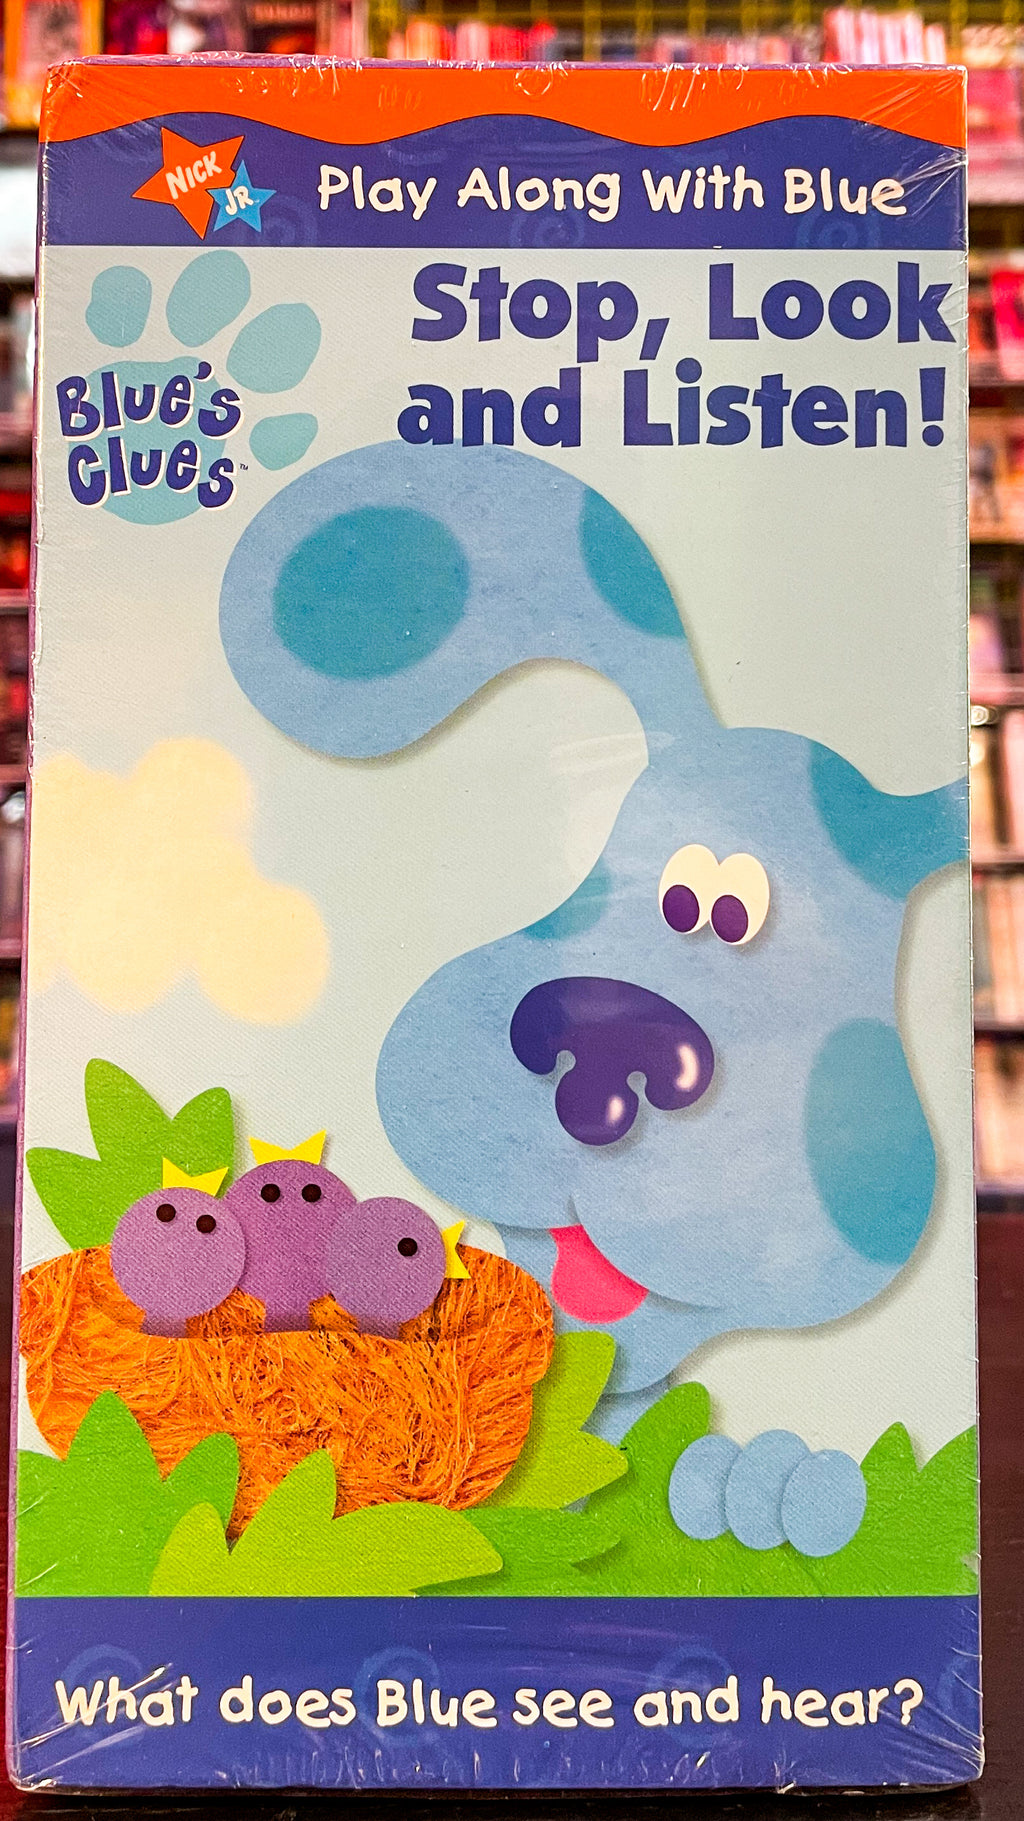 Blues Clues: Stop, Look, and Listen!